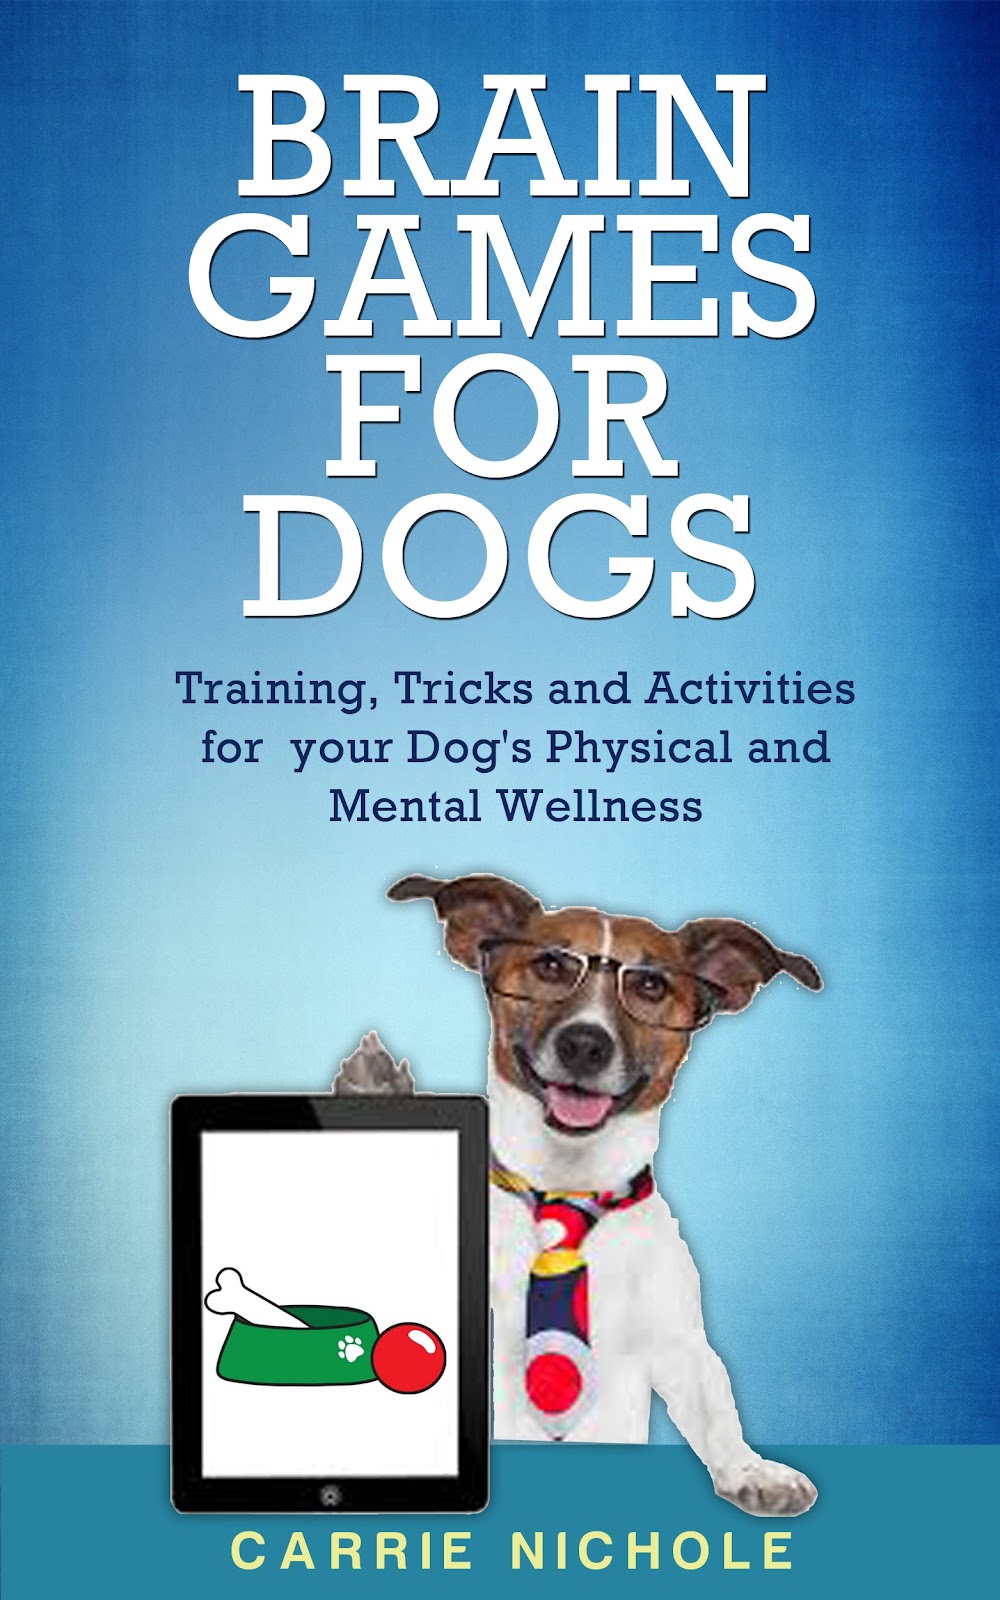 Popular Books - Brain Games for Dogs: Training, Tricks and Activities for your Dog’s Physical and Mental wellness( Dog training, Puppy training,Pet training books, Puppy ... games for dogs, How to train a dog Book 1)